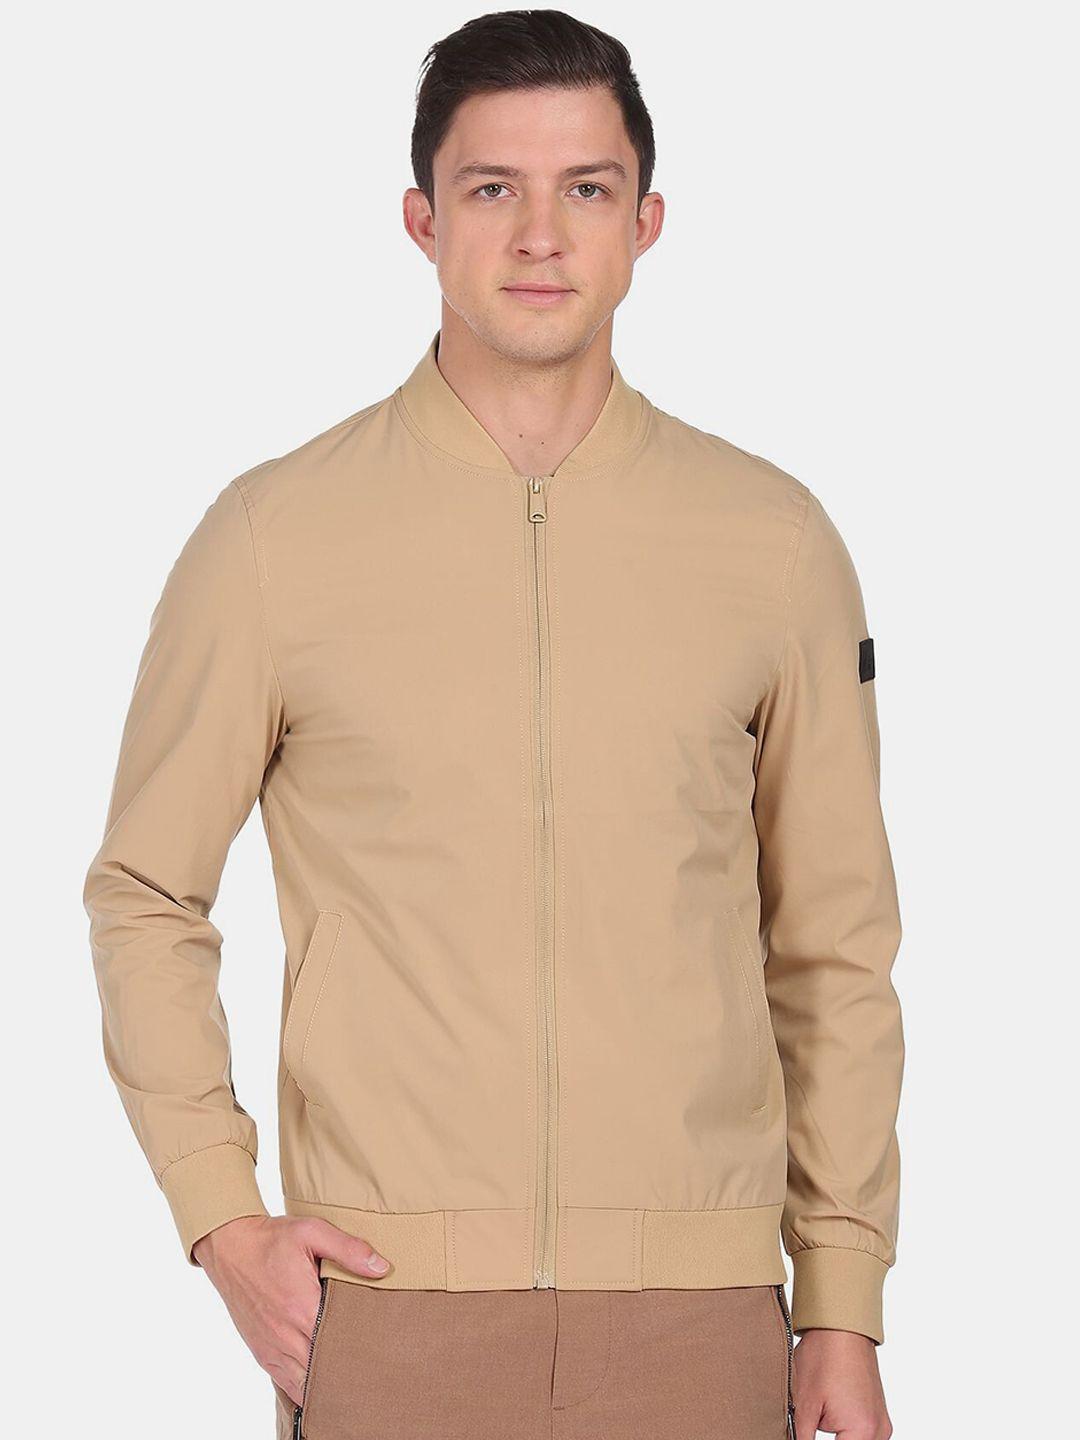 Arrow Sport Men Beige Bomber with Embroidered Jacket